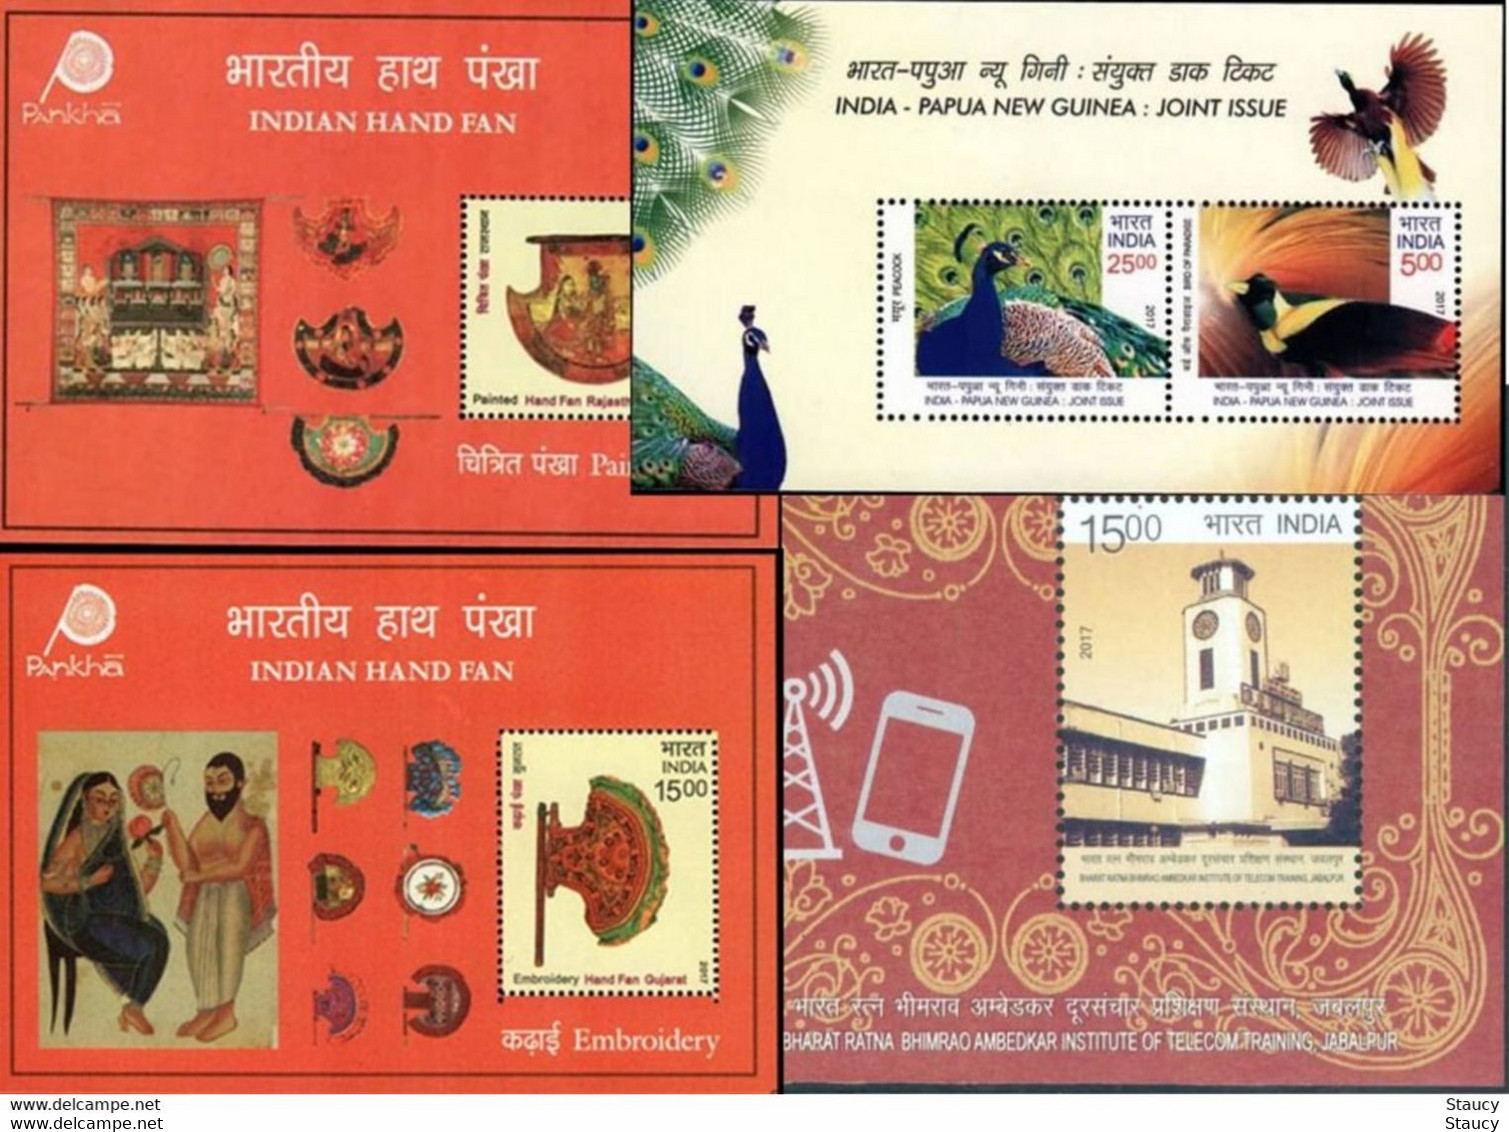 India 2017 Complete/ Full Set Of 29 Different Mini/ Miniature Sheets Year Pack MS MNH As Per Scan - Pfauen